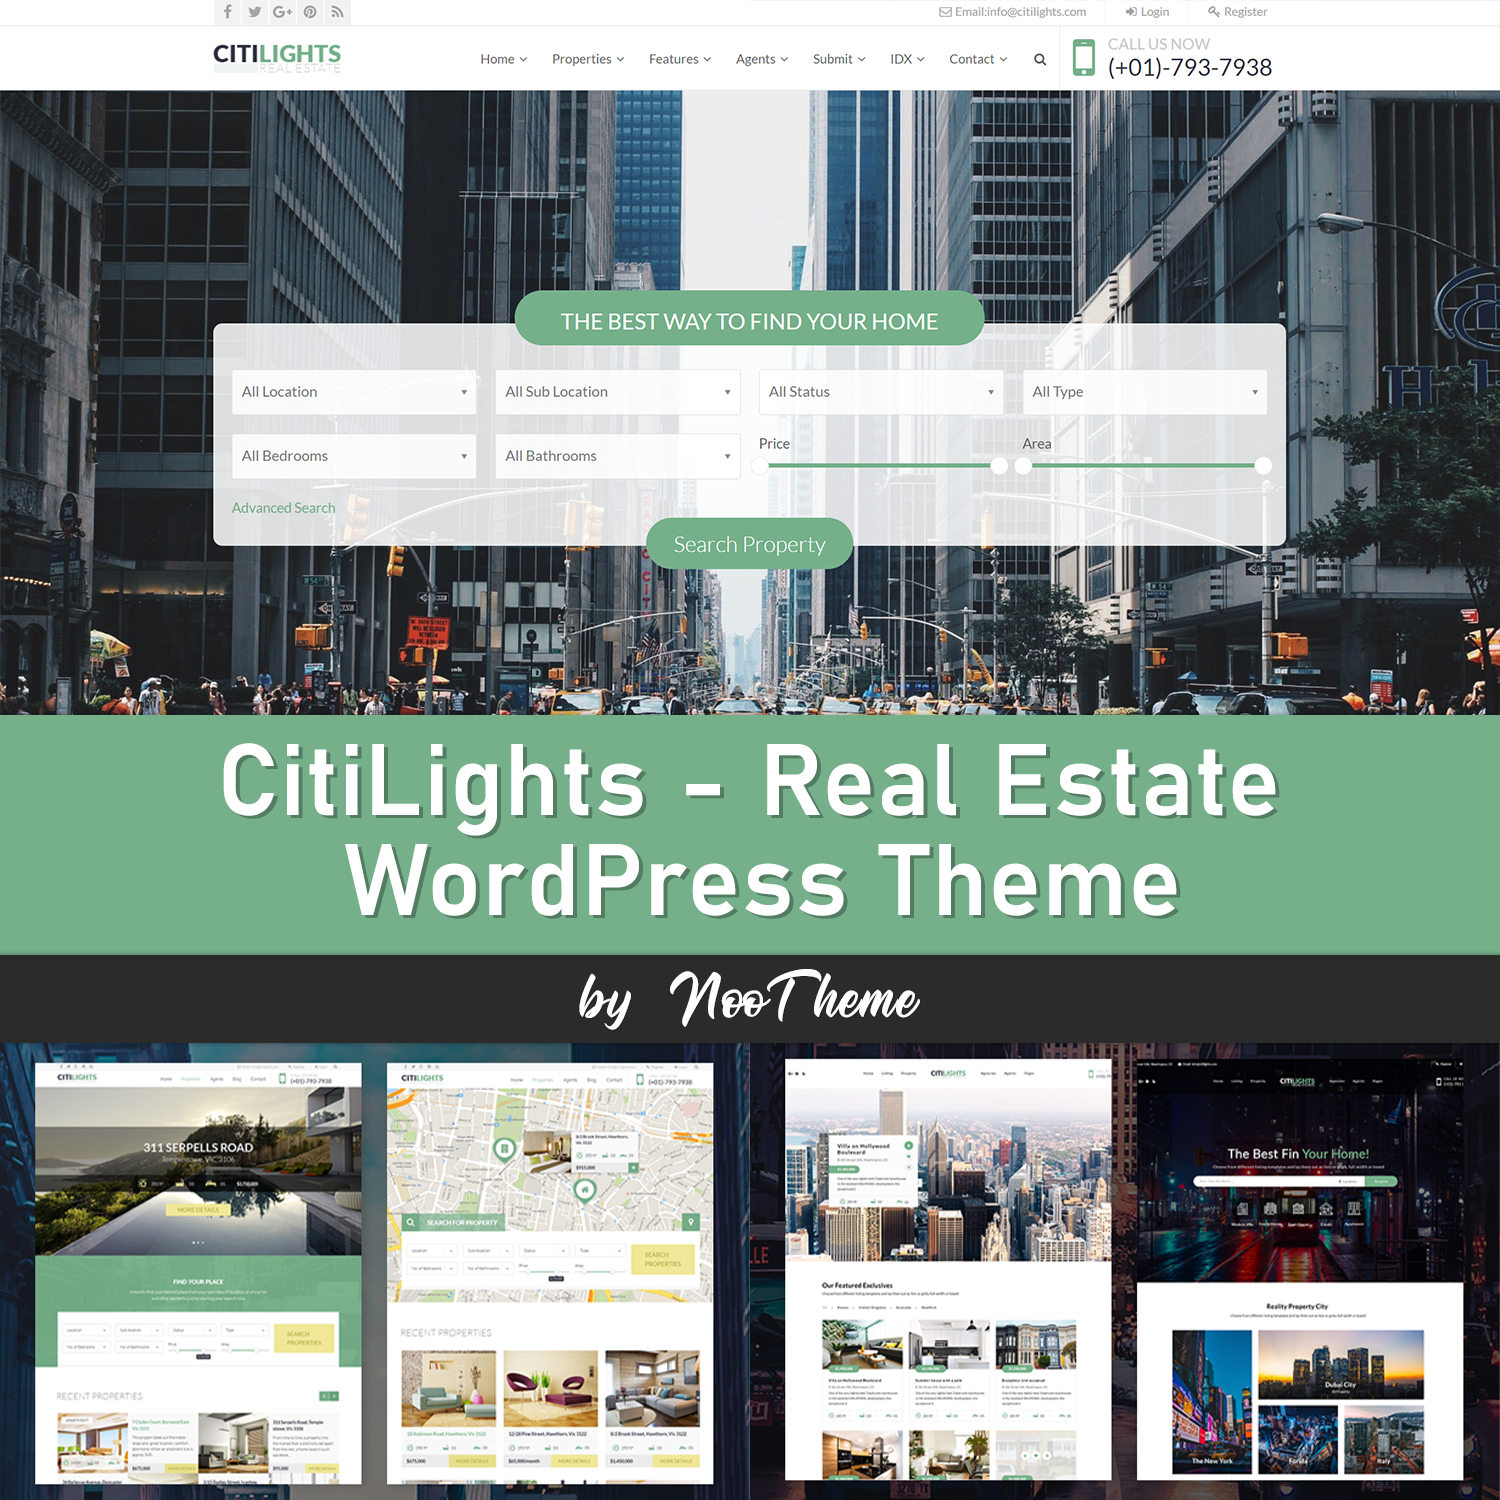 Images with citilights real estate wordpress theme.